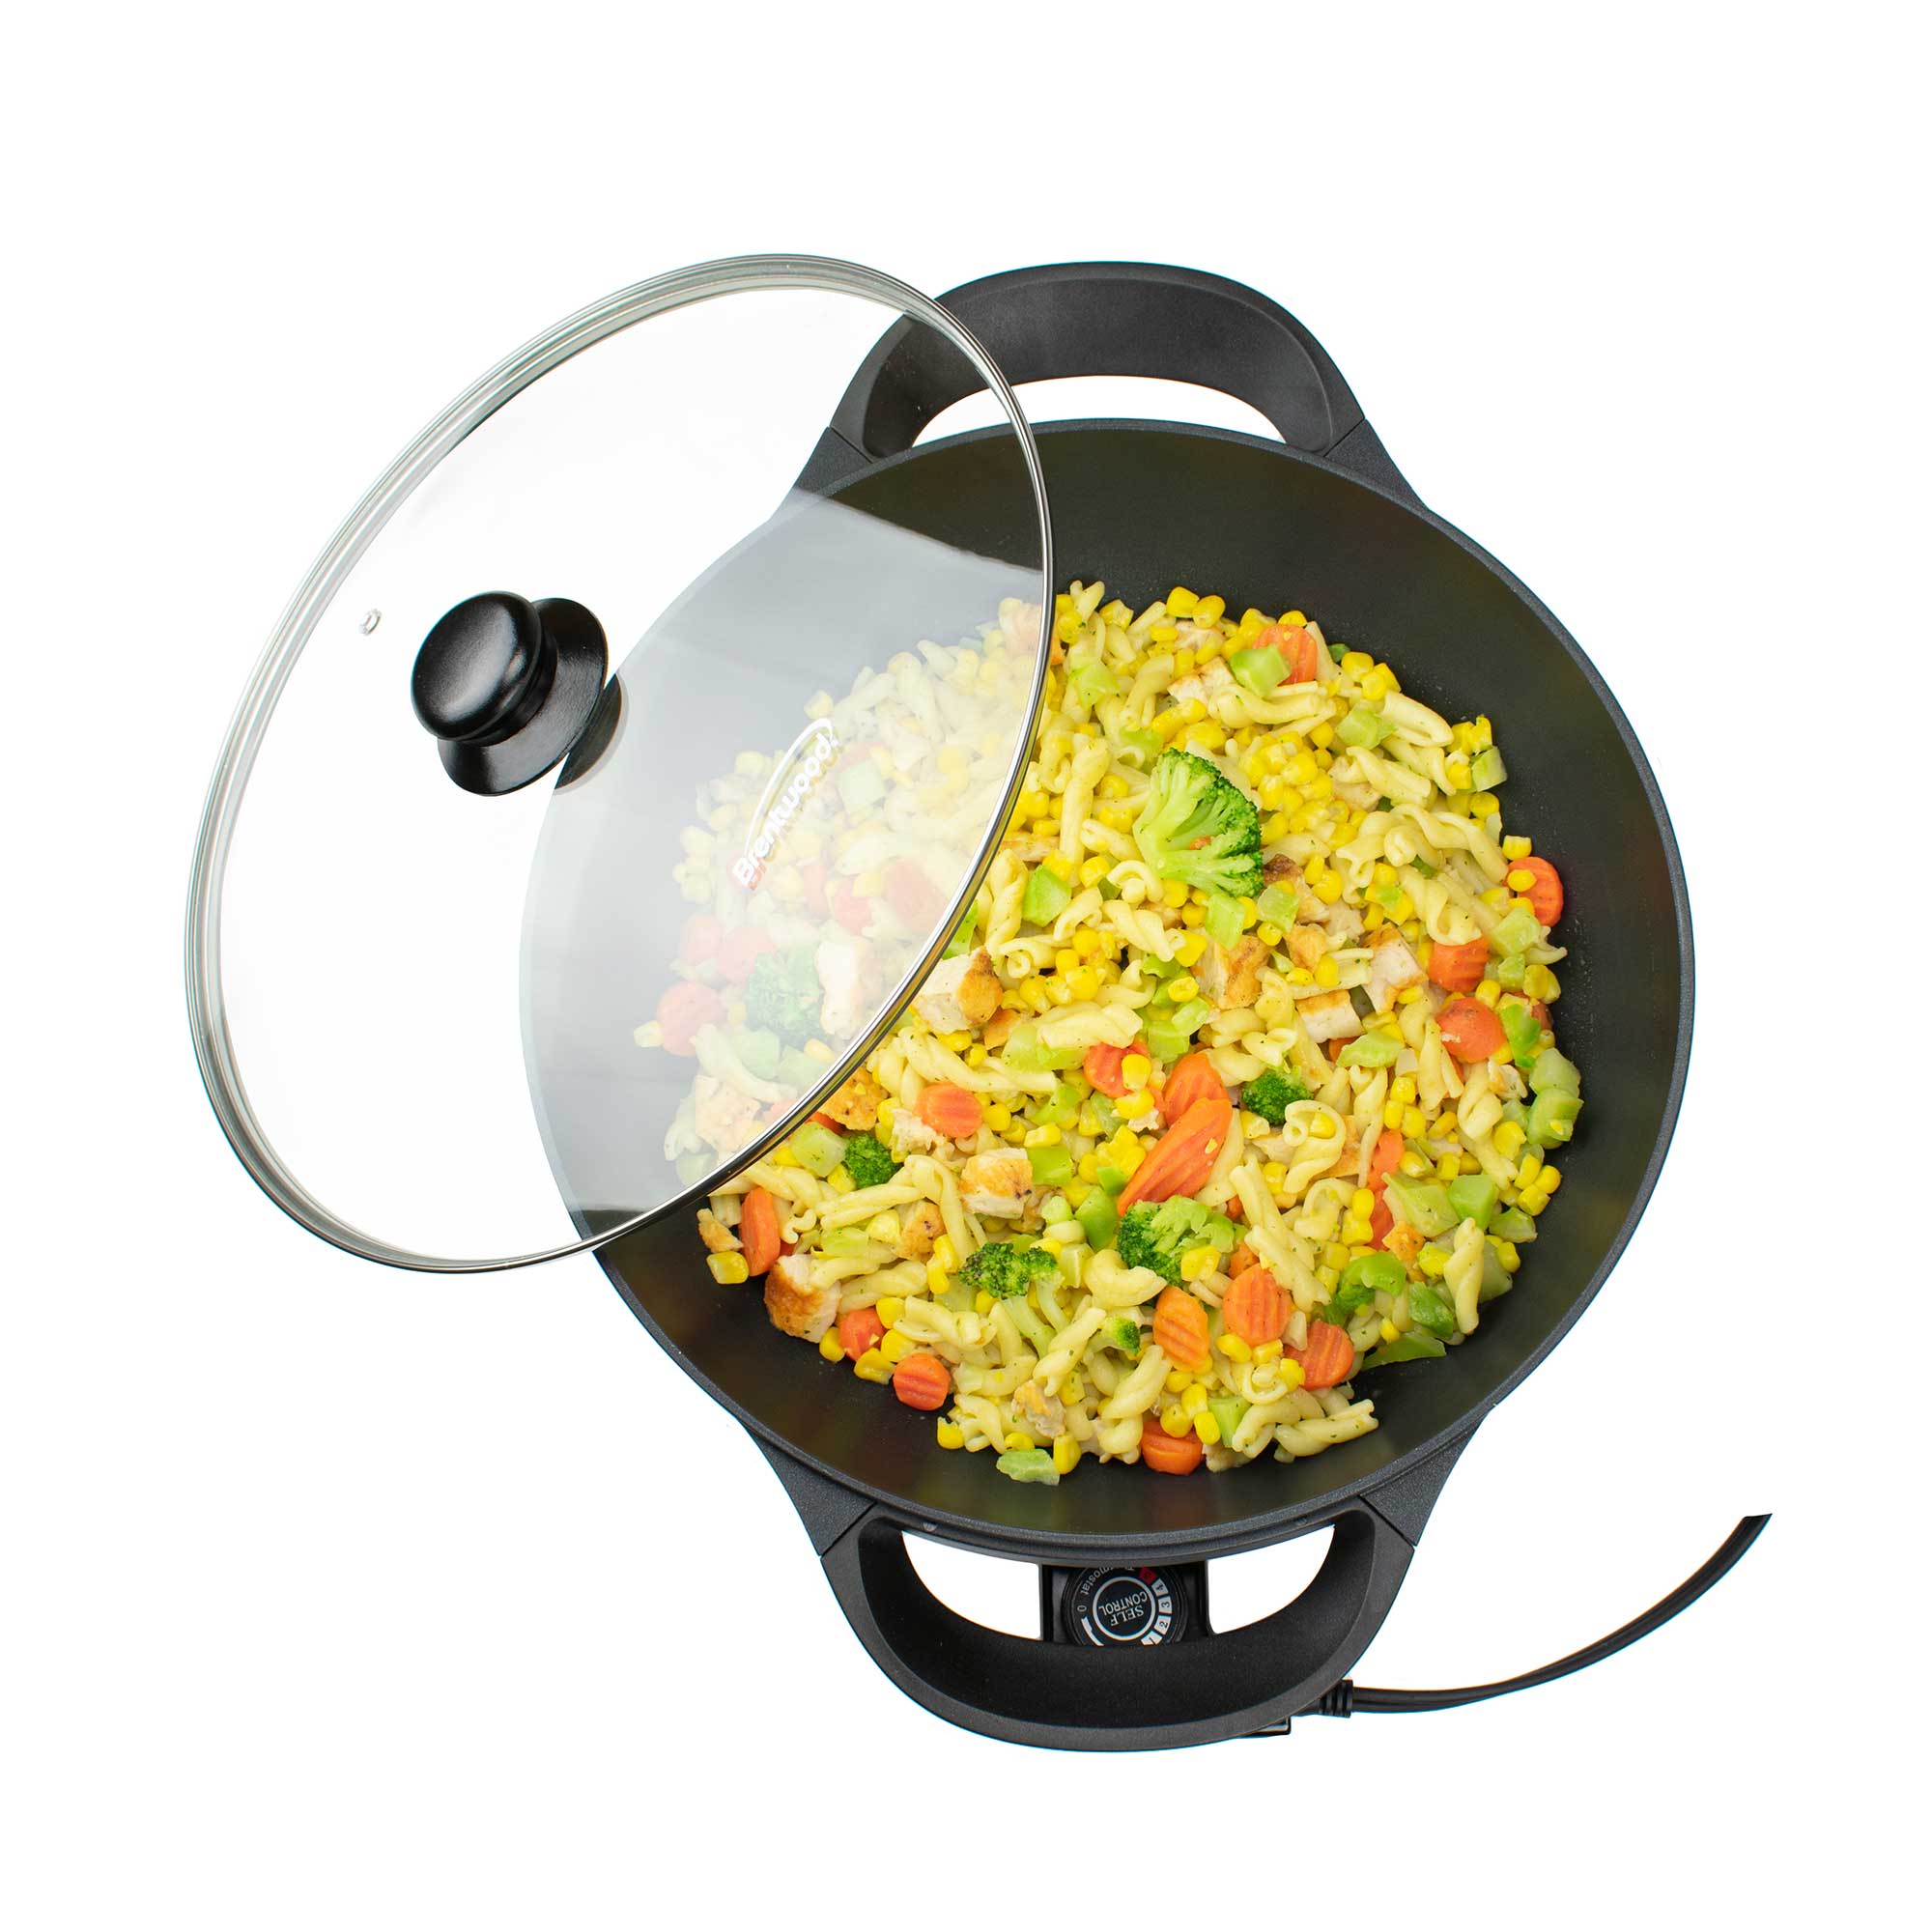 Brentwood SK-69BK 13-Inch Non-Stick Flat Bottom Electric Wok Skillet w -  Brentwood Appliances